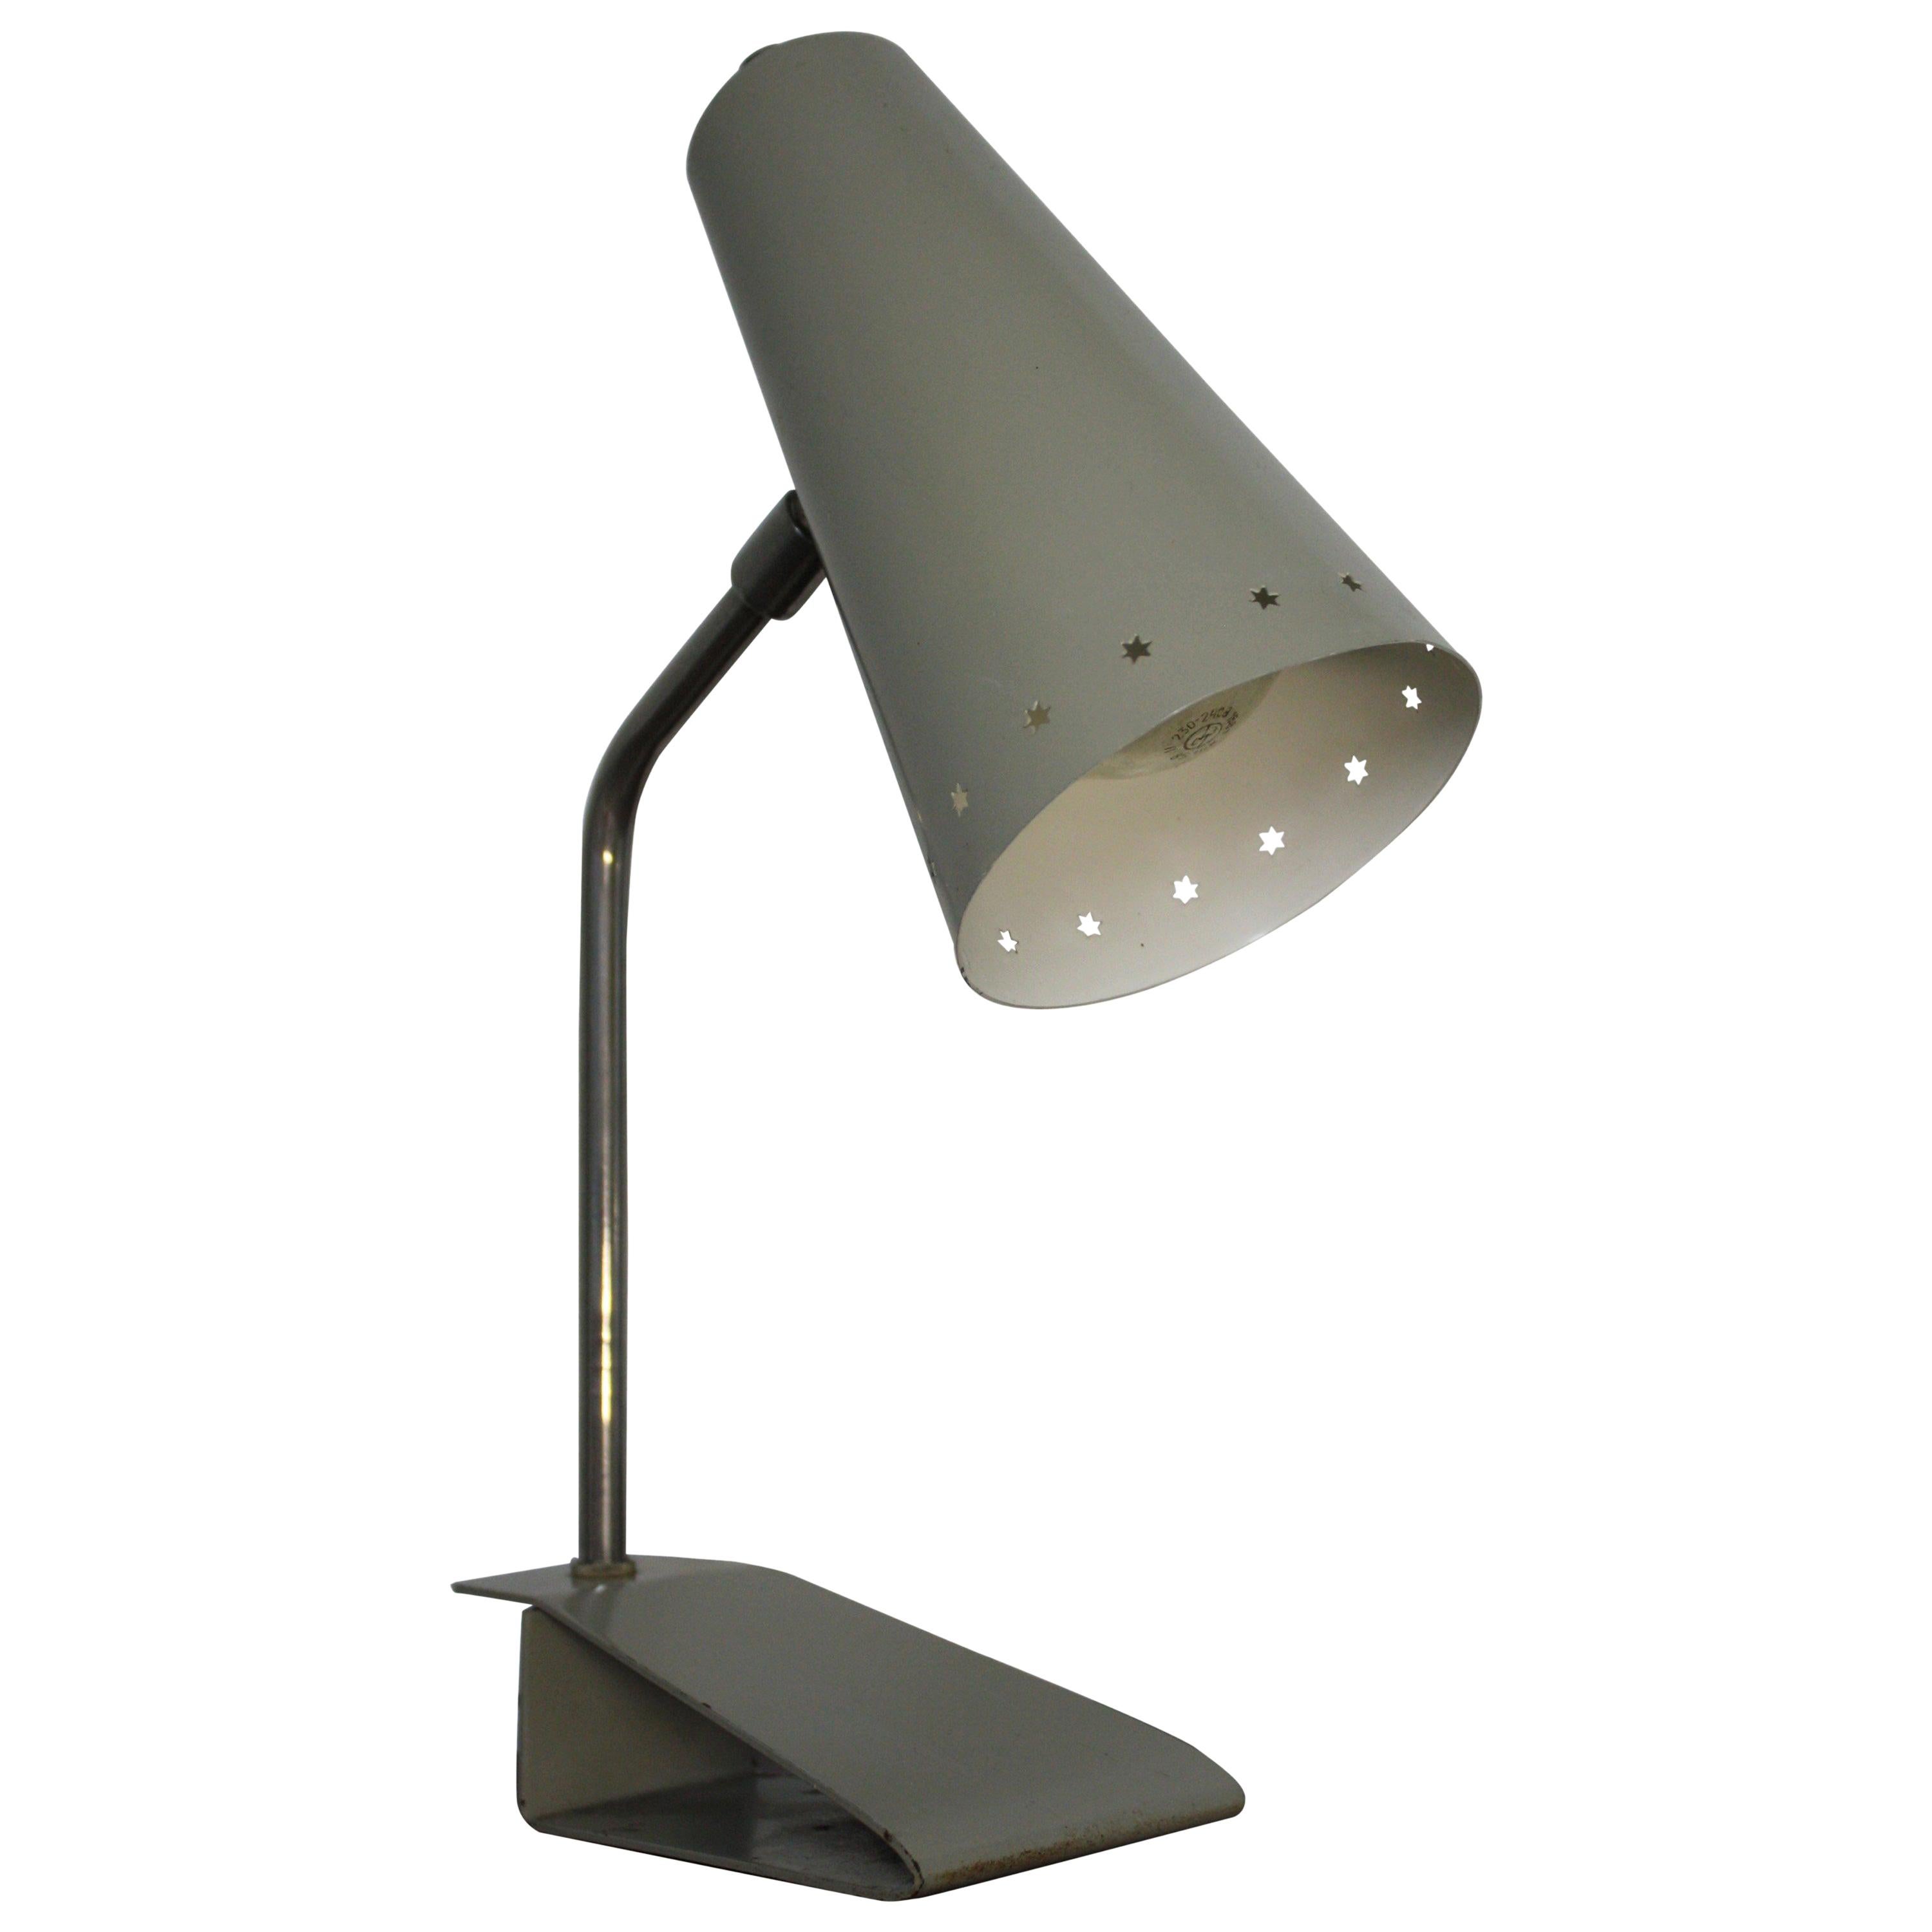 Grey Table of Wall Lamp, Model Pinocchio by H. Busquetand and Hala Zeist, 1950s For Sale